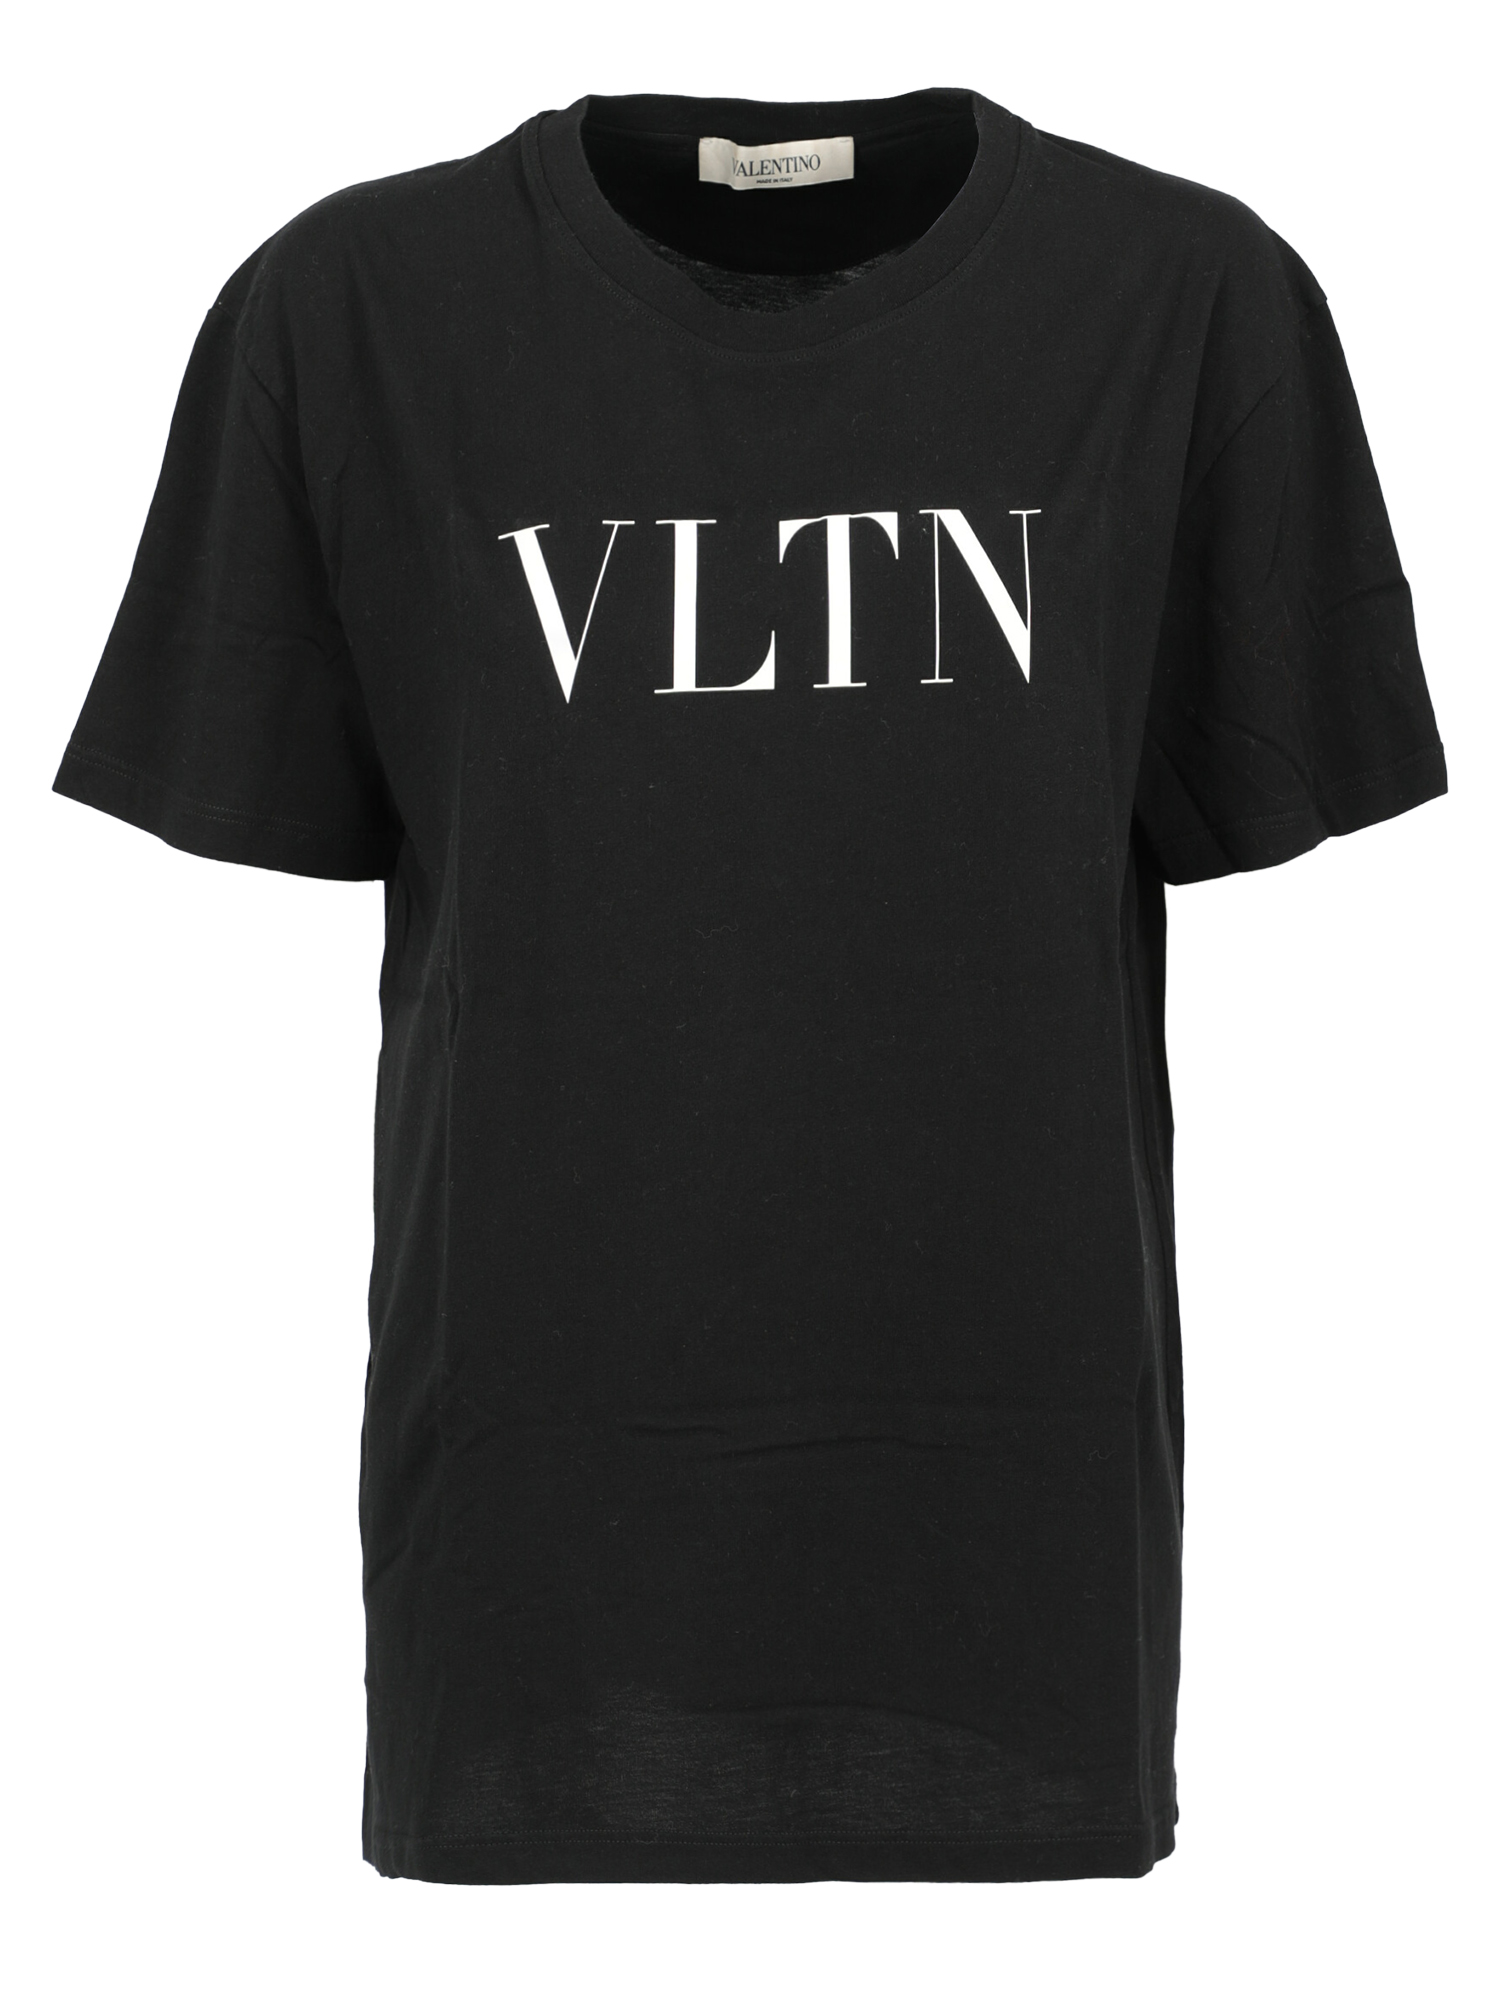 Valentino Special Price Women T-shirts and Top Black M | eBay